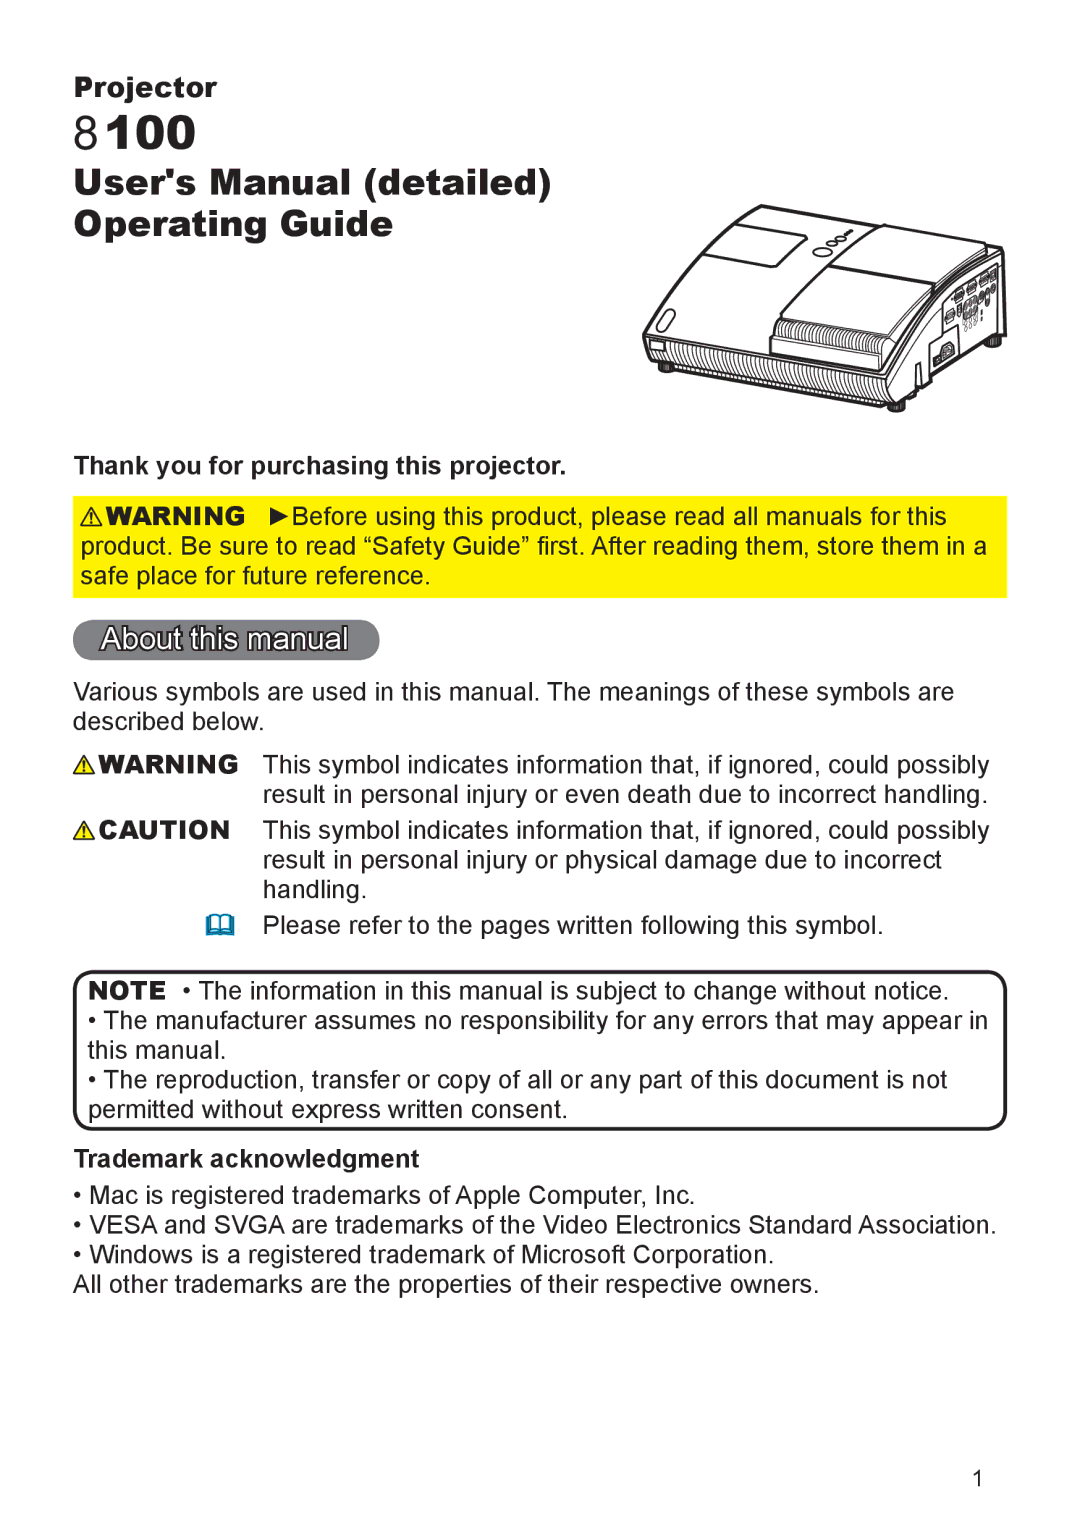 Epson 8100 user manual About this manual, Thank you for purchasing this projector, Trademark acknowledgment 